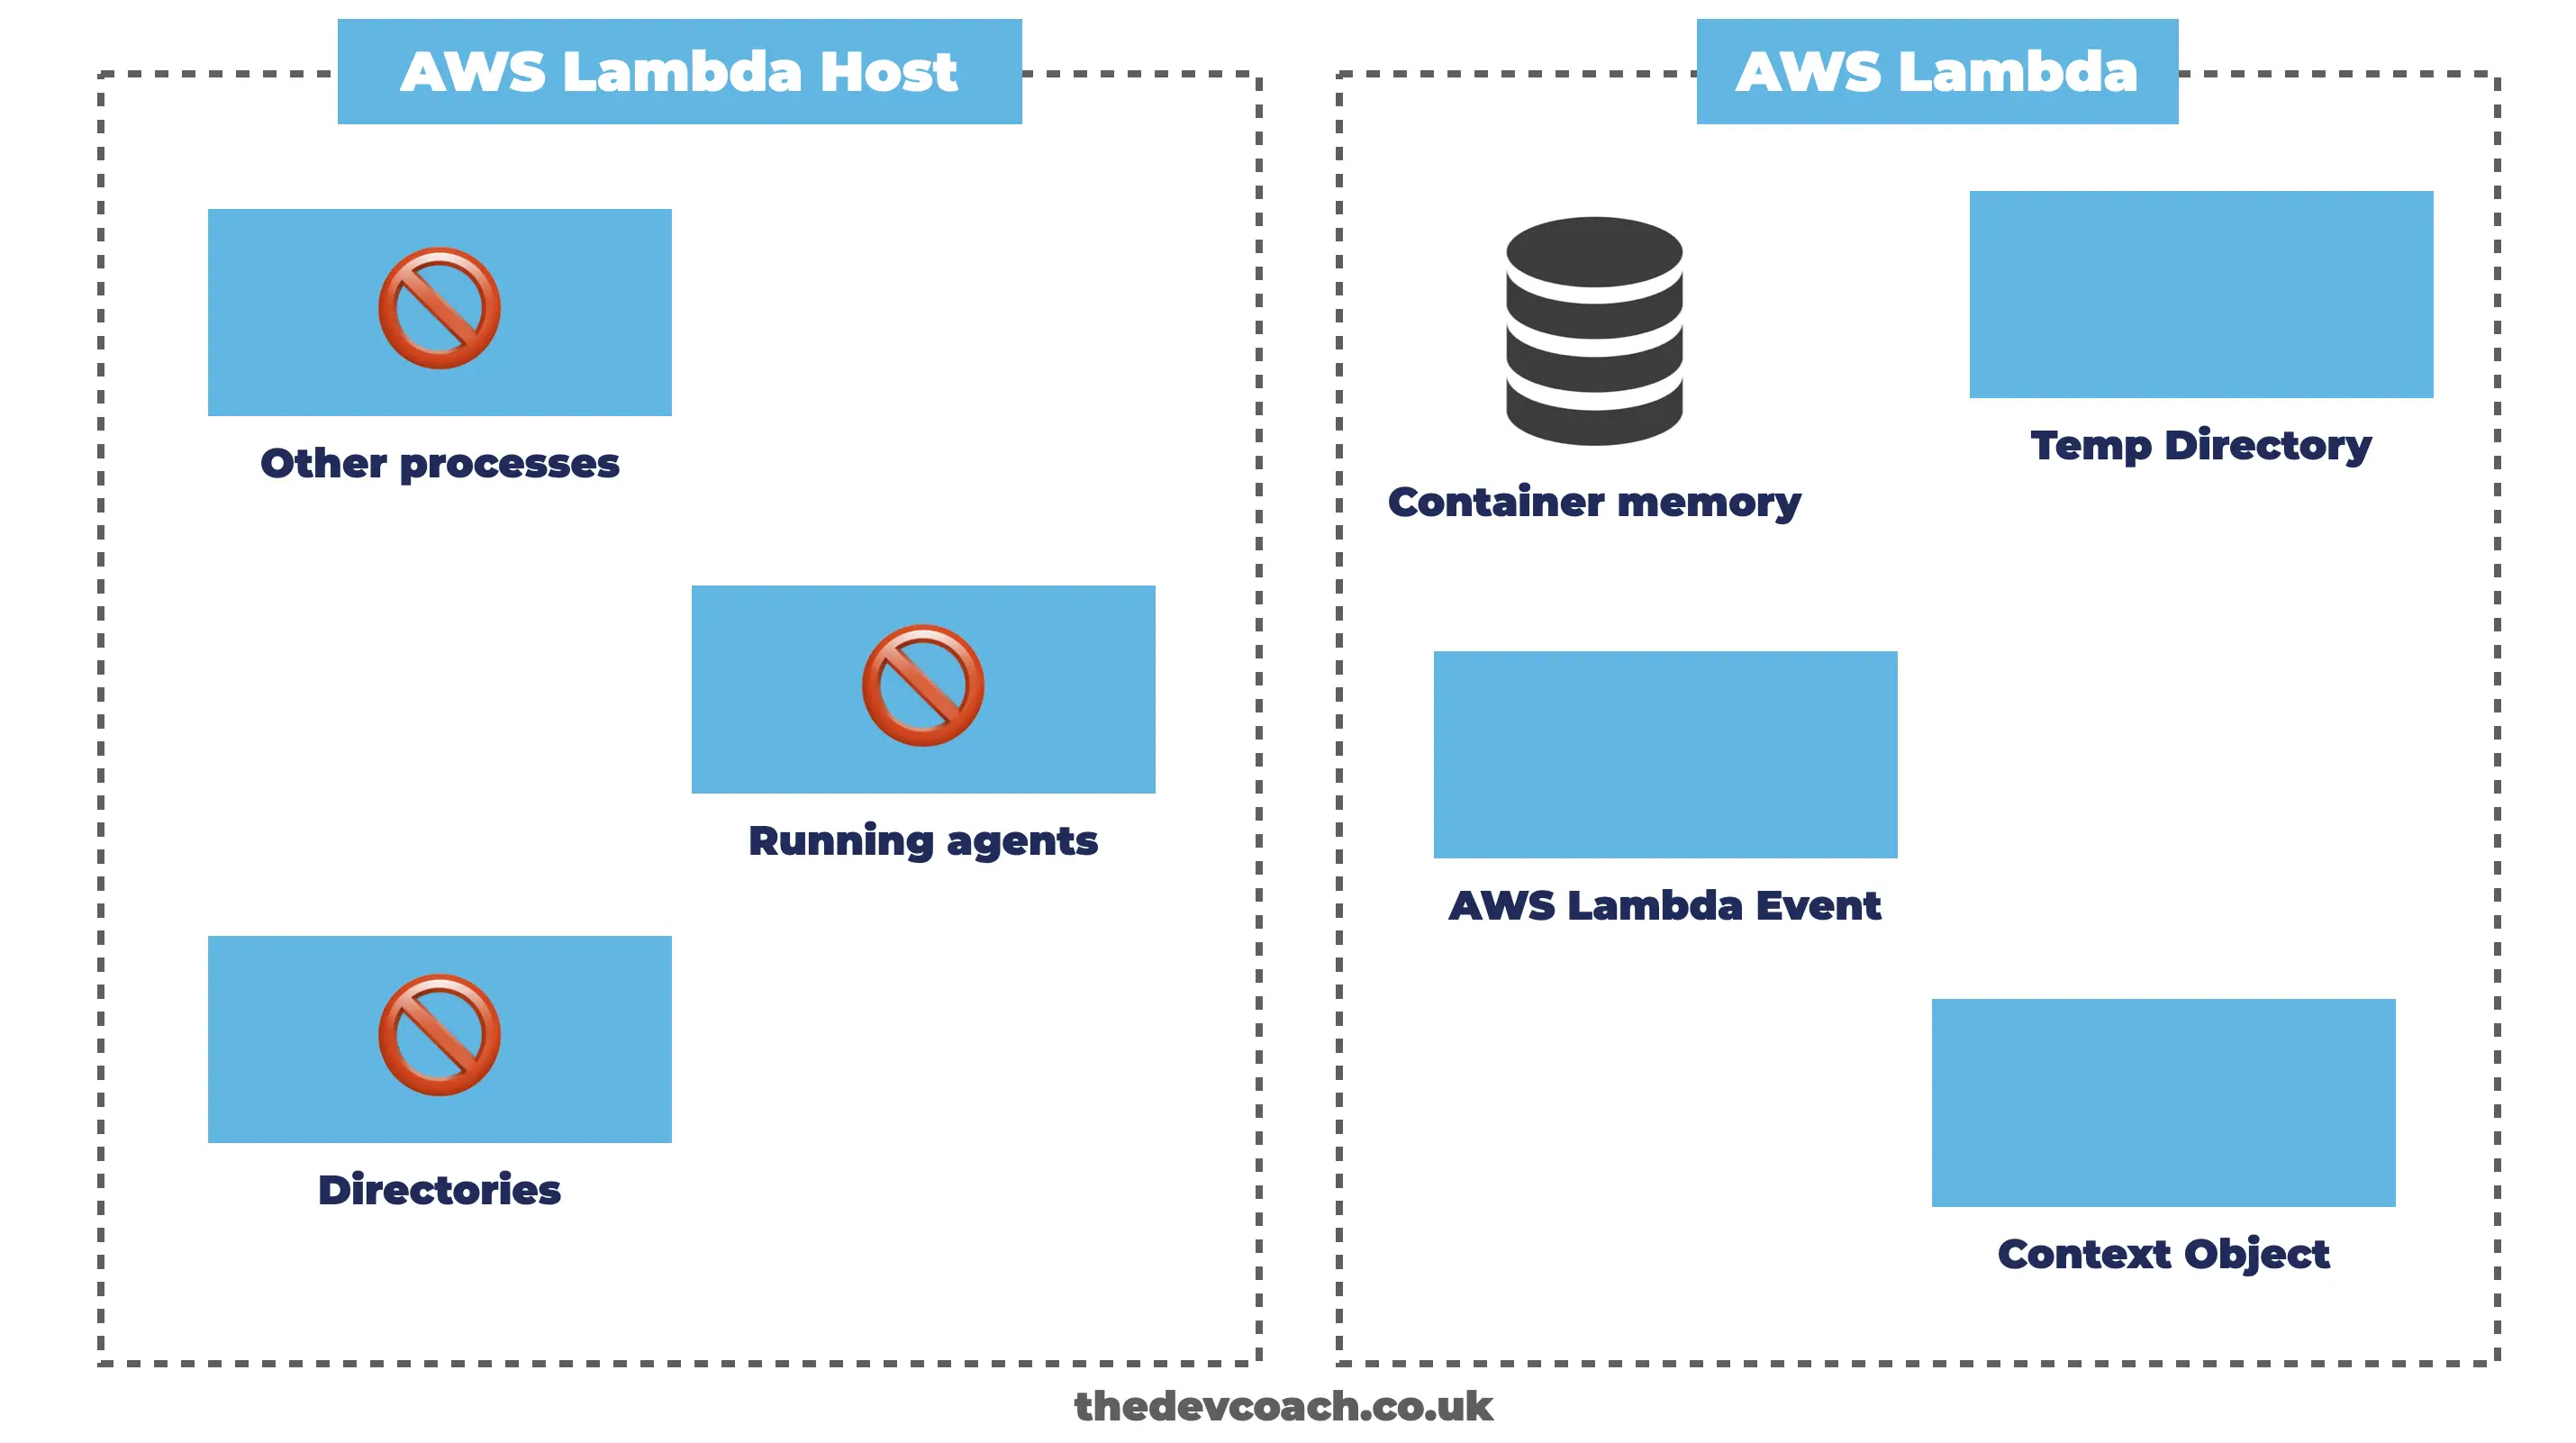 What You Can Access In AWS Lambda